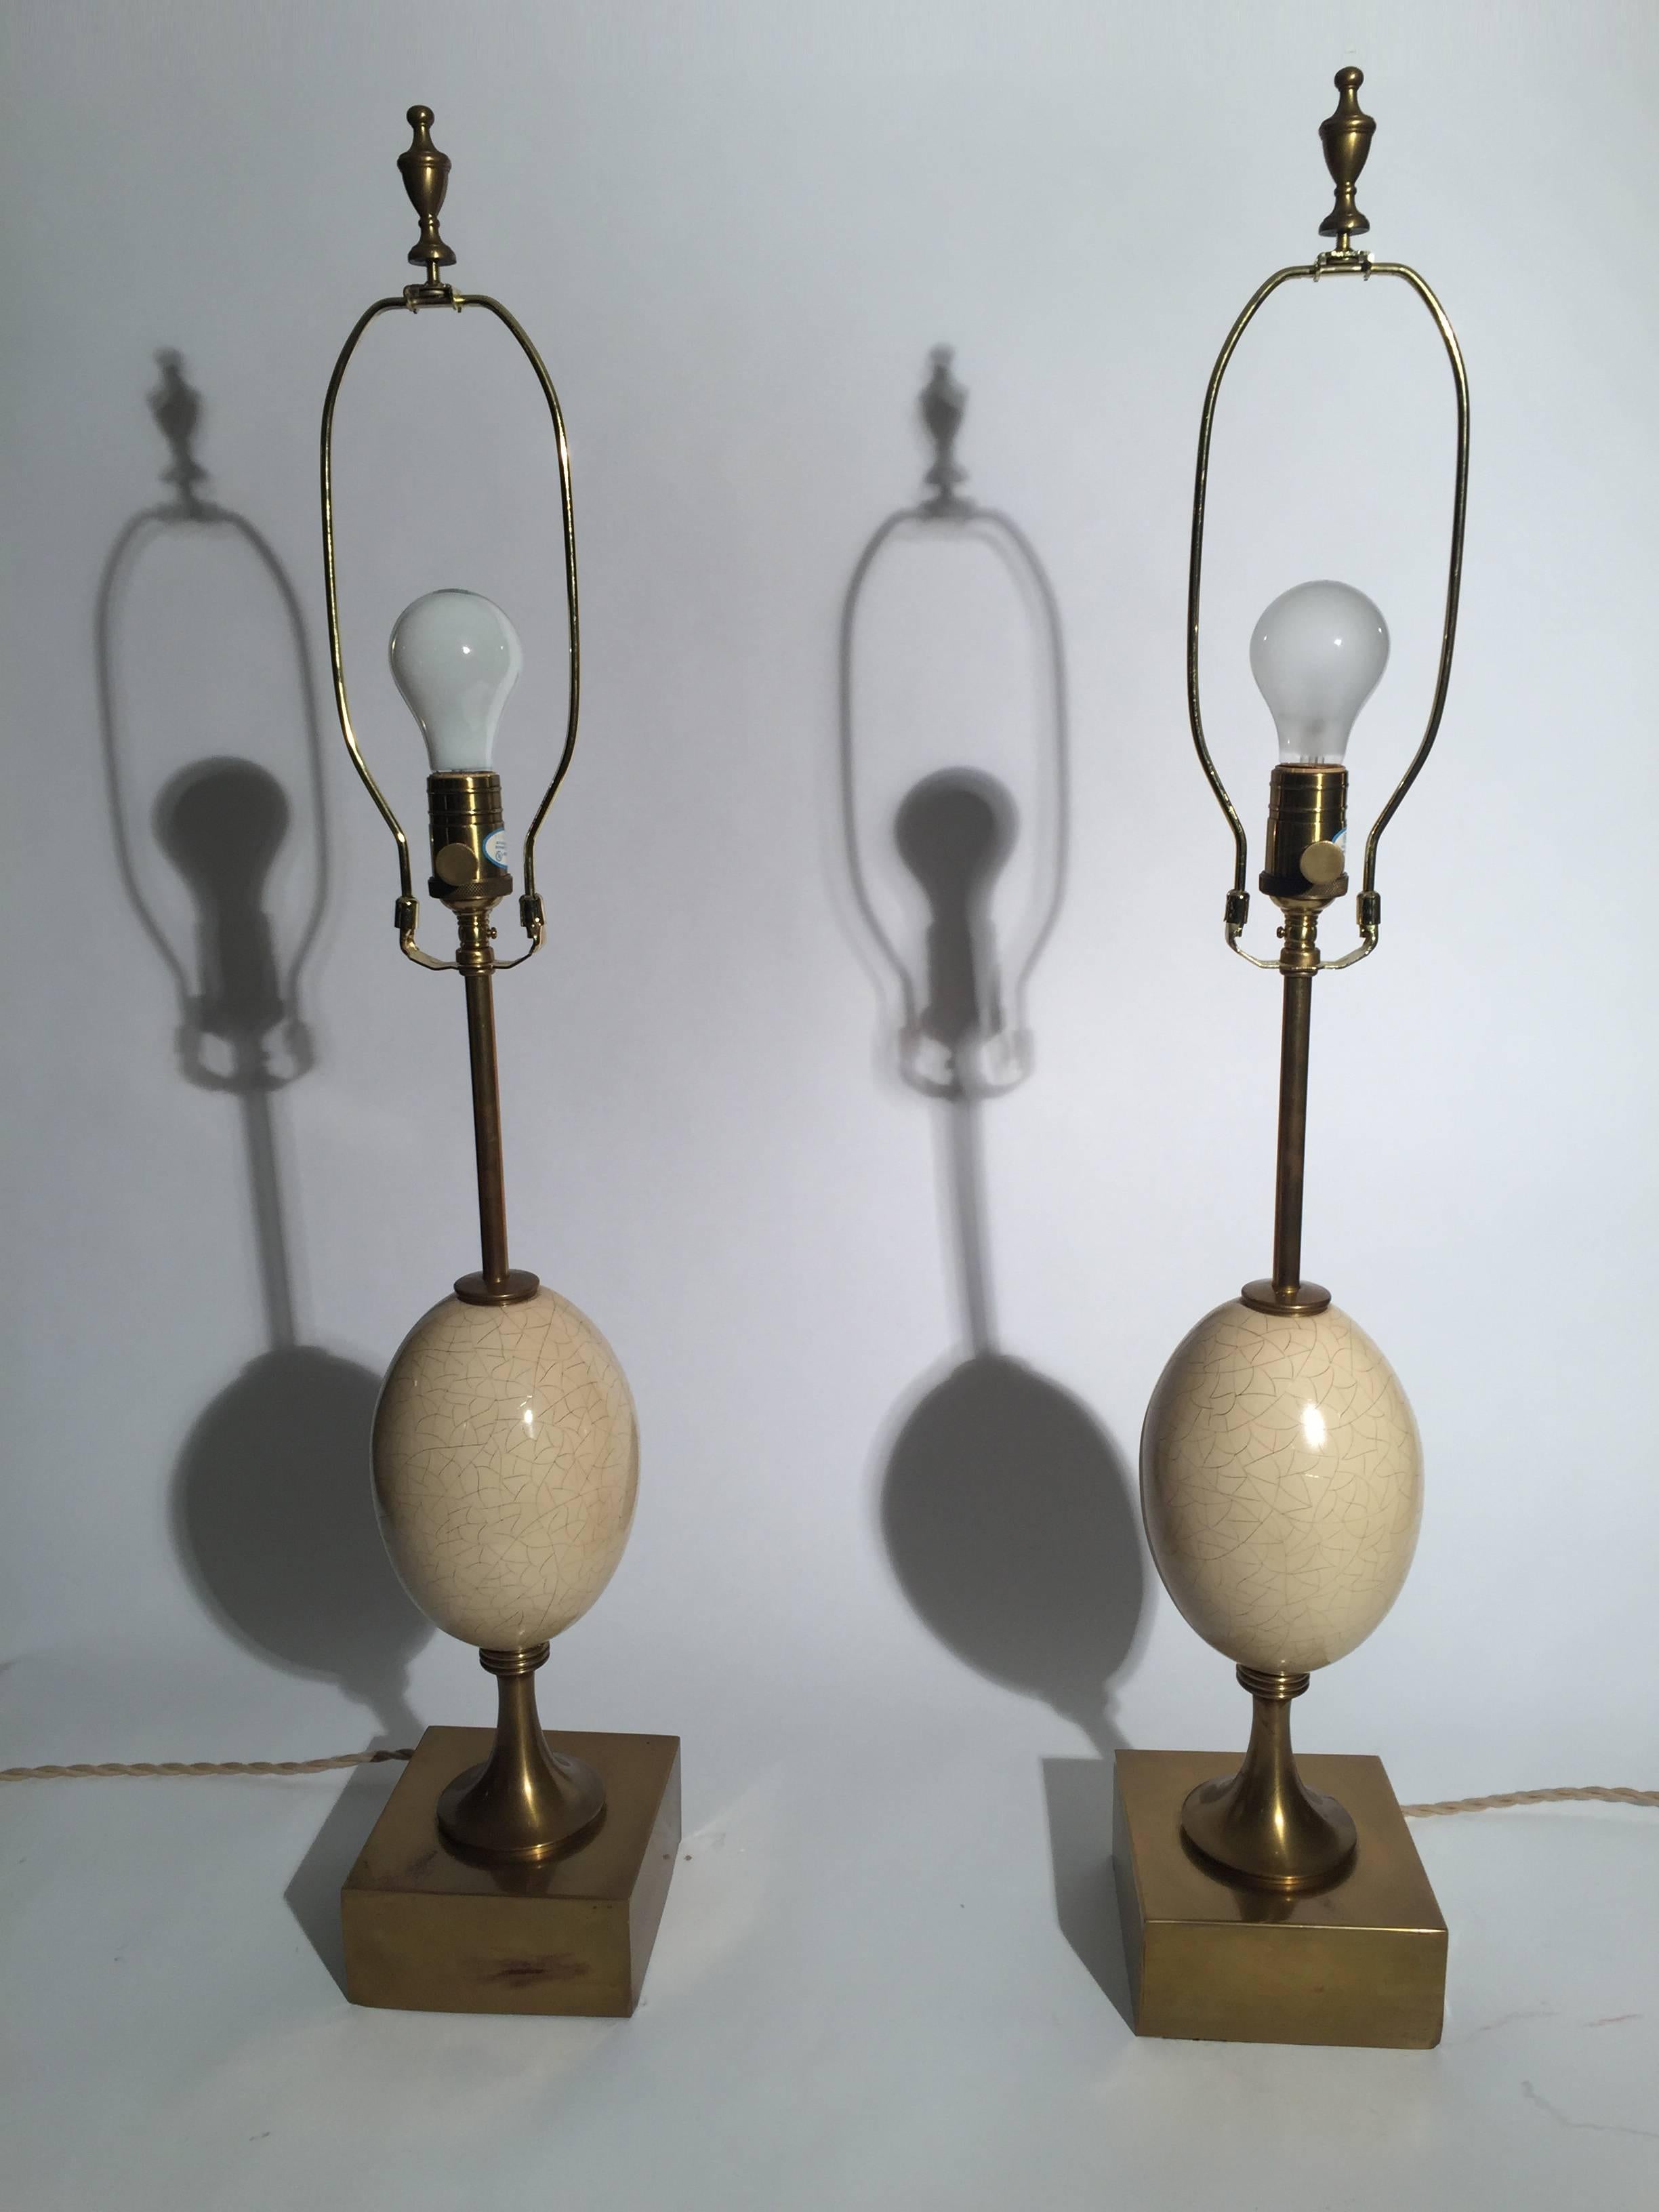 A pair of burnished brass and enamel Mid-Century Modern lamps in the form of Ostrich eggs. The eggs are metal with a crackle enamel resembling the crackle finish of an ostrich egg. Very chic and stylish. The simple drum shades are for photographic